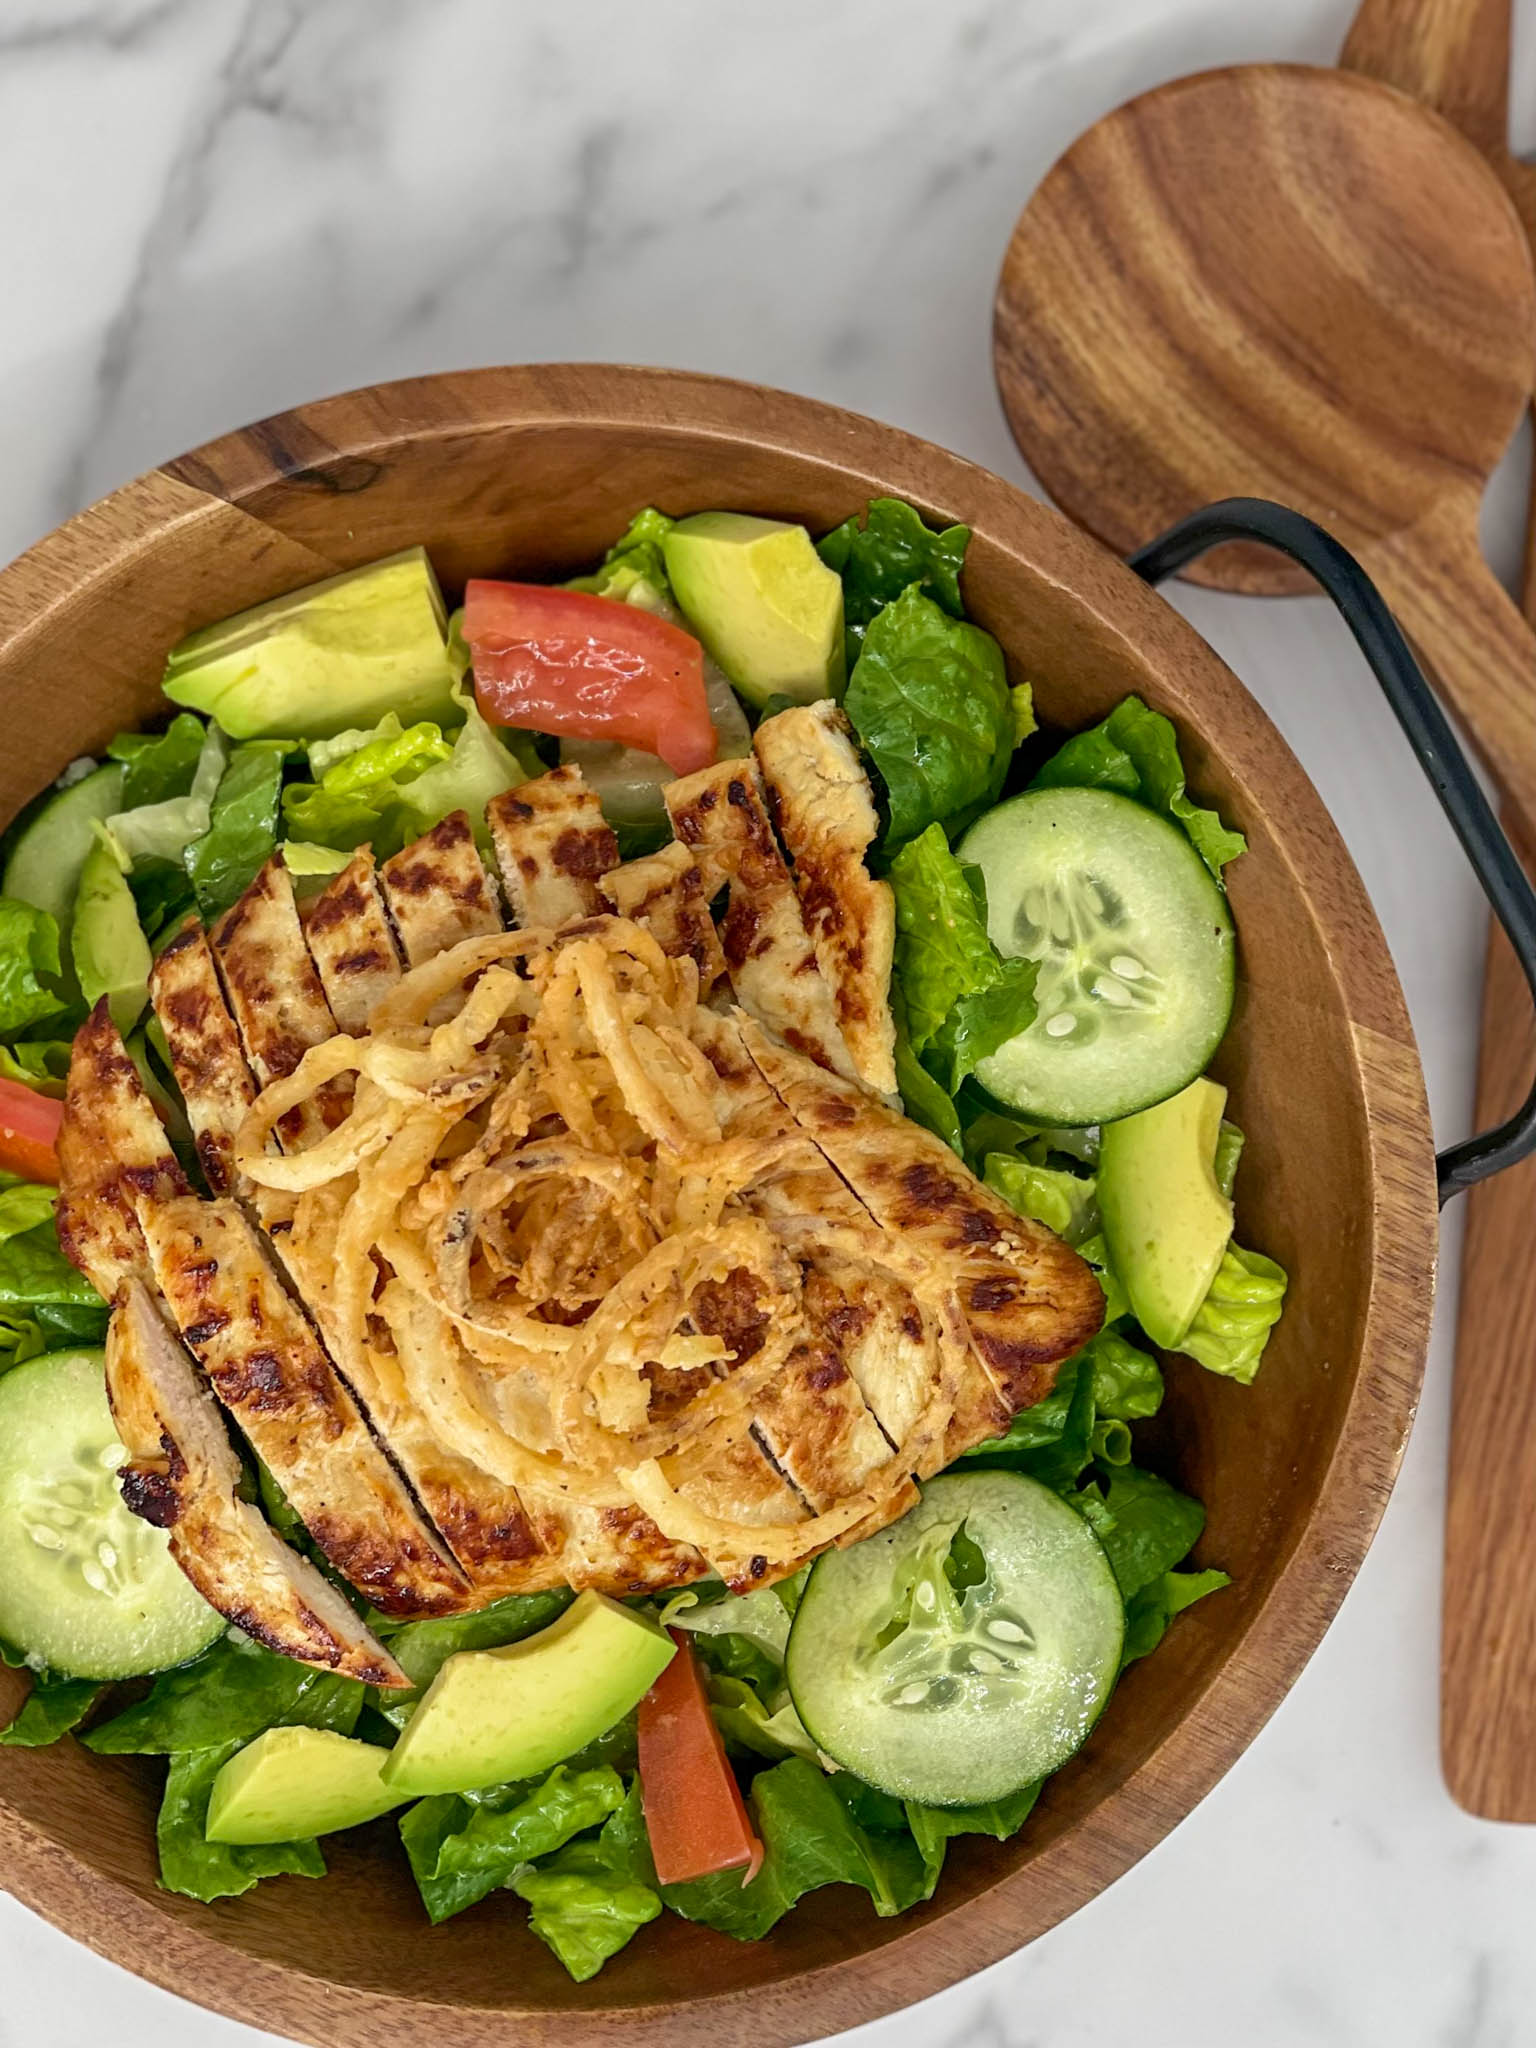 Fresh salad with grilled chicken served in a large wooden bowl.